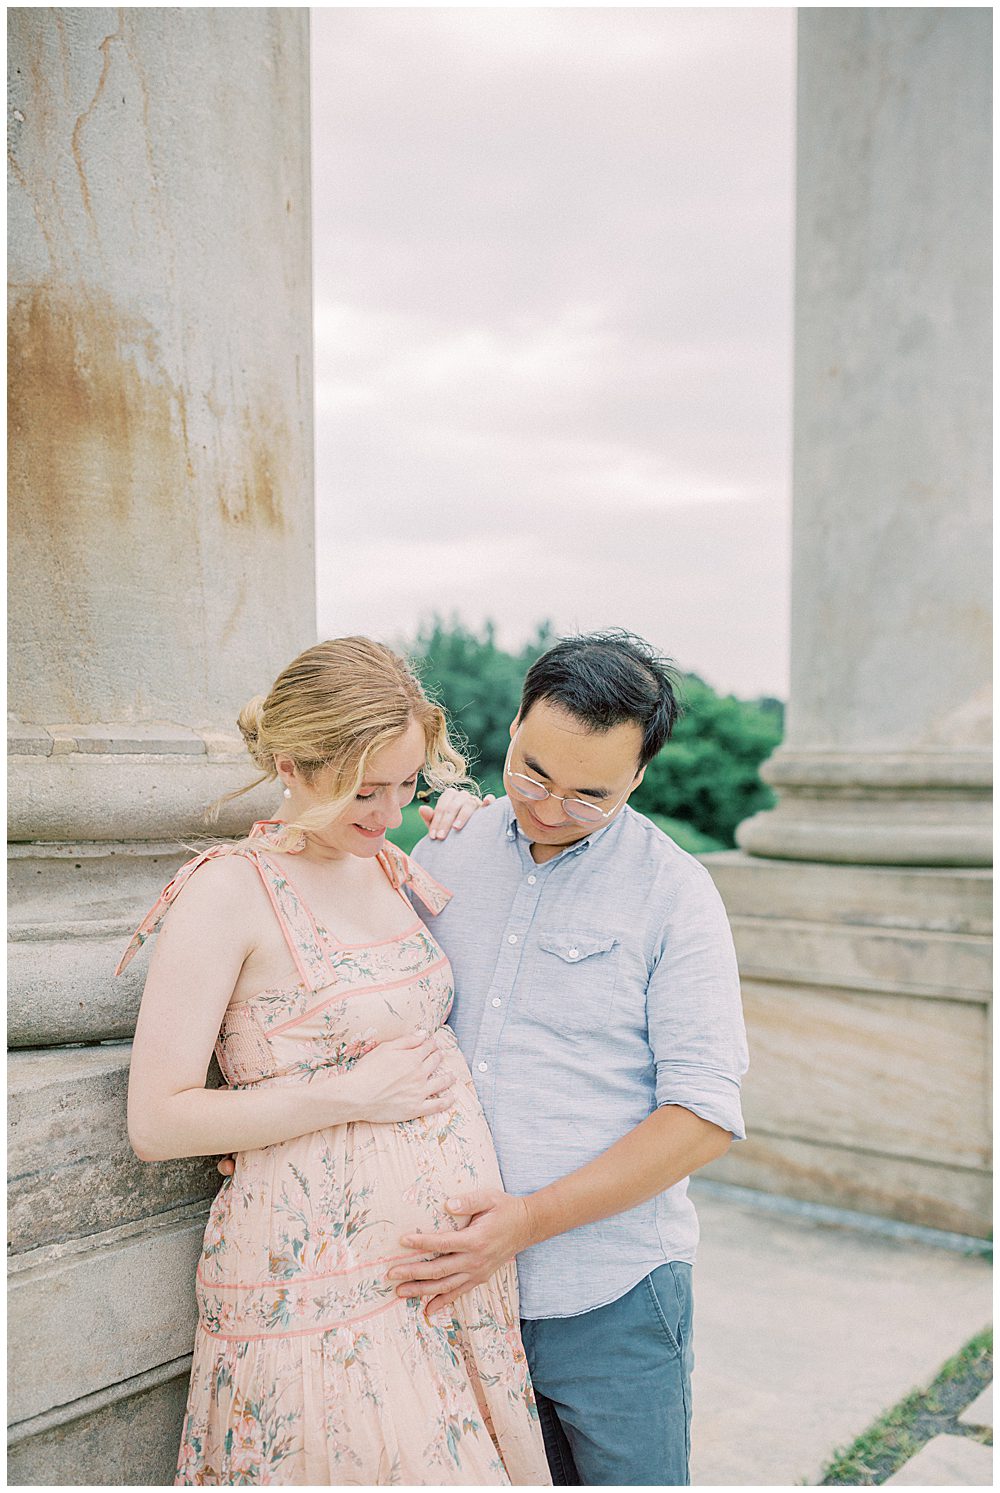 Pregnant mother leans against pillar while husband places hand on her belly during their National Arboretum maternity session.